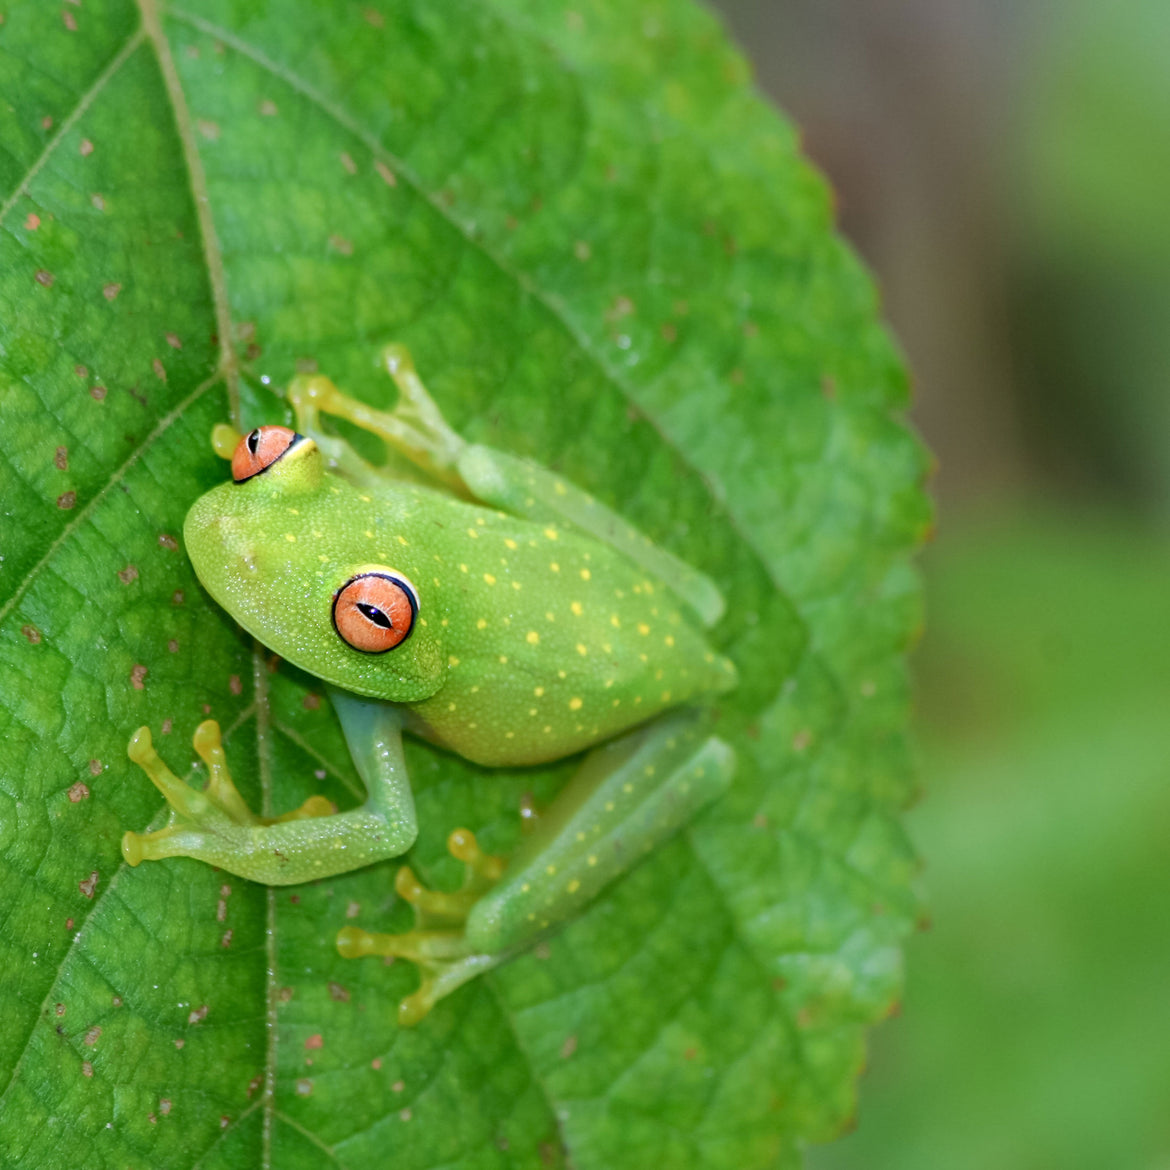 Why We’ve Fallen in Love with Frogs